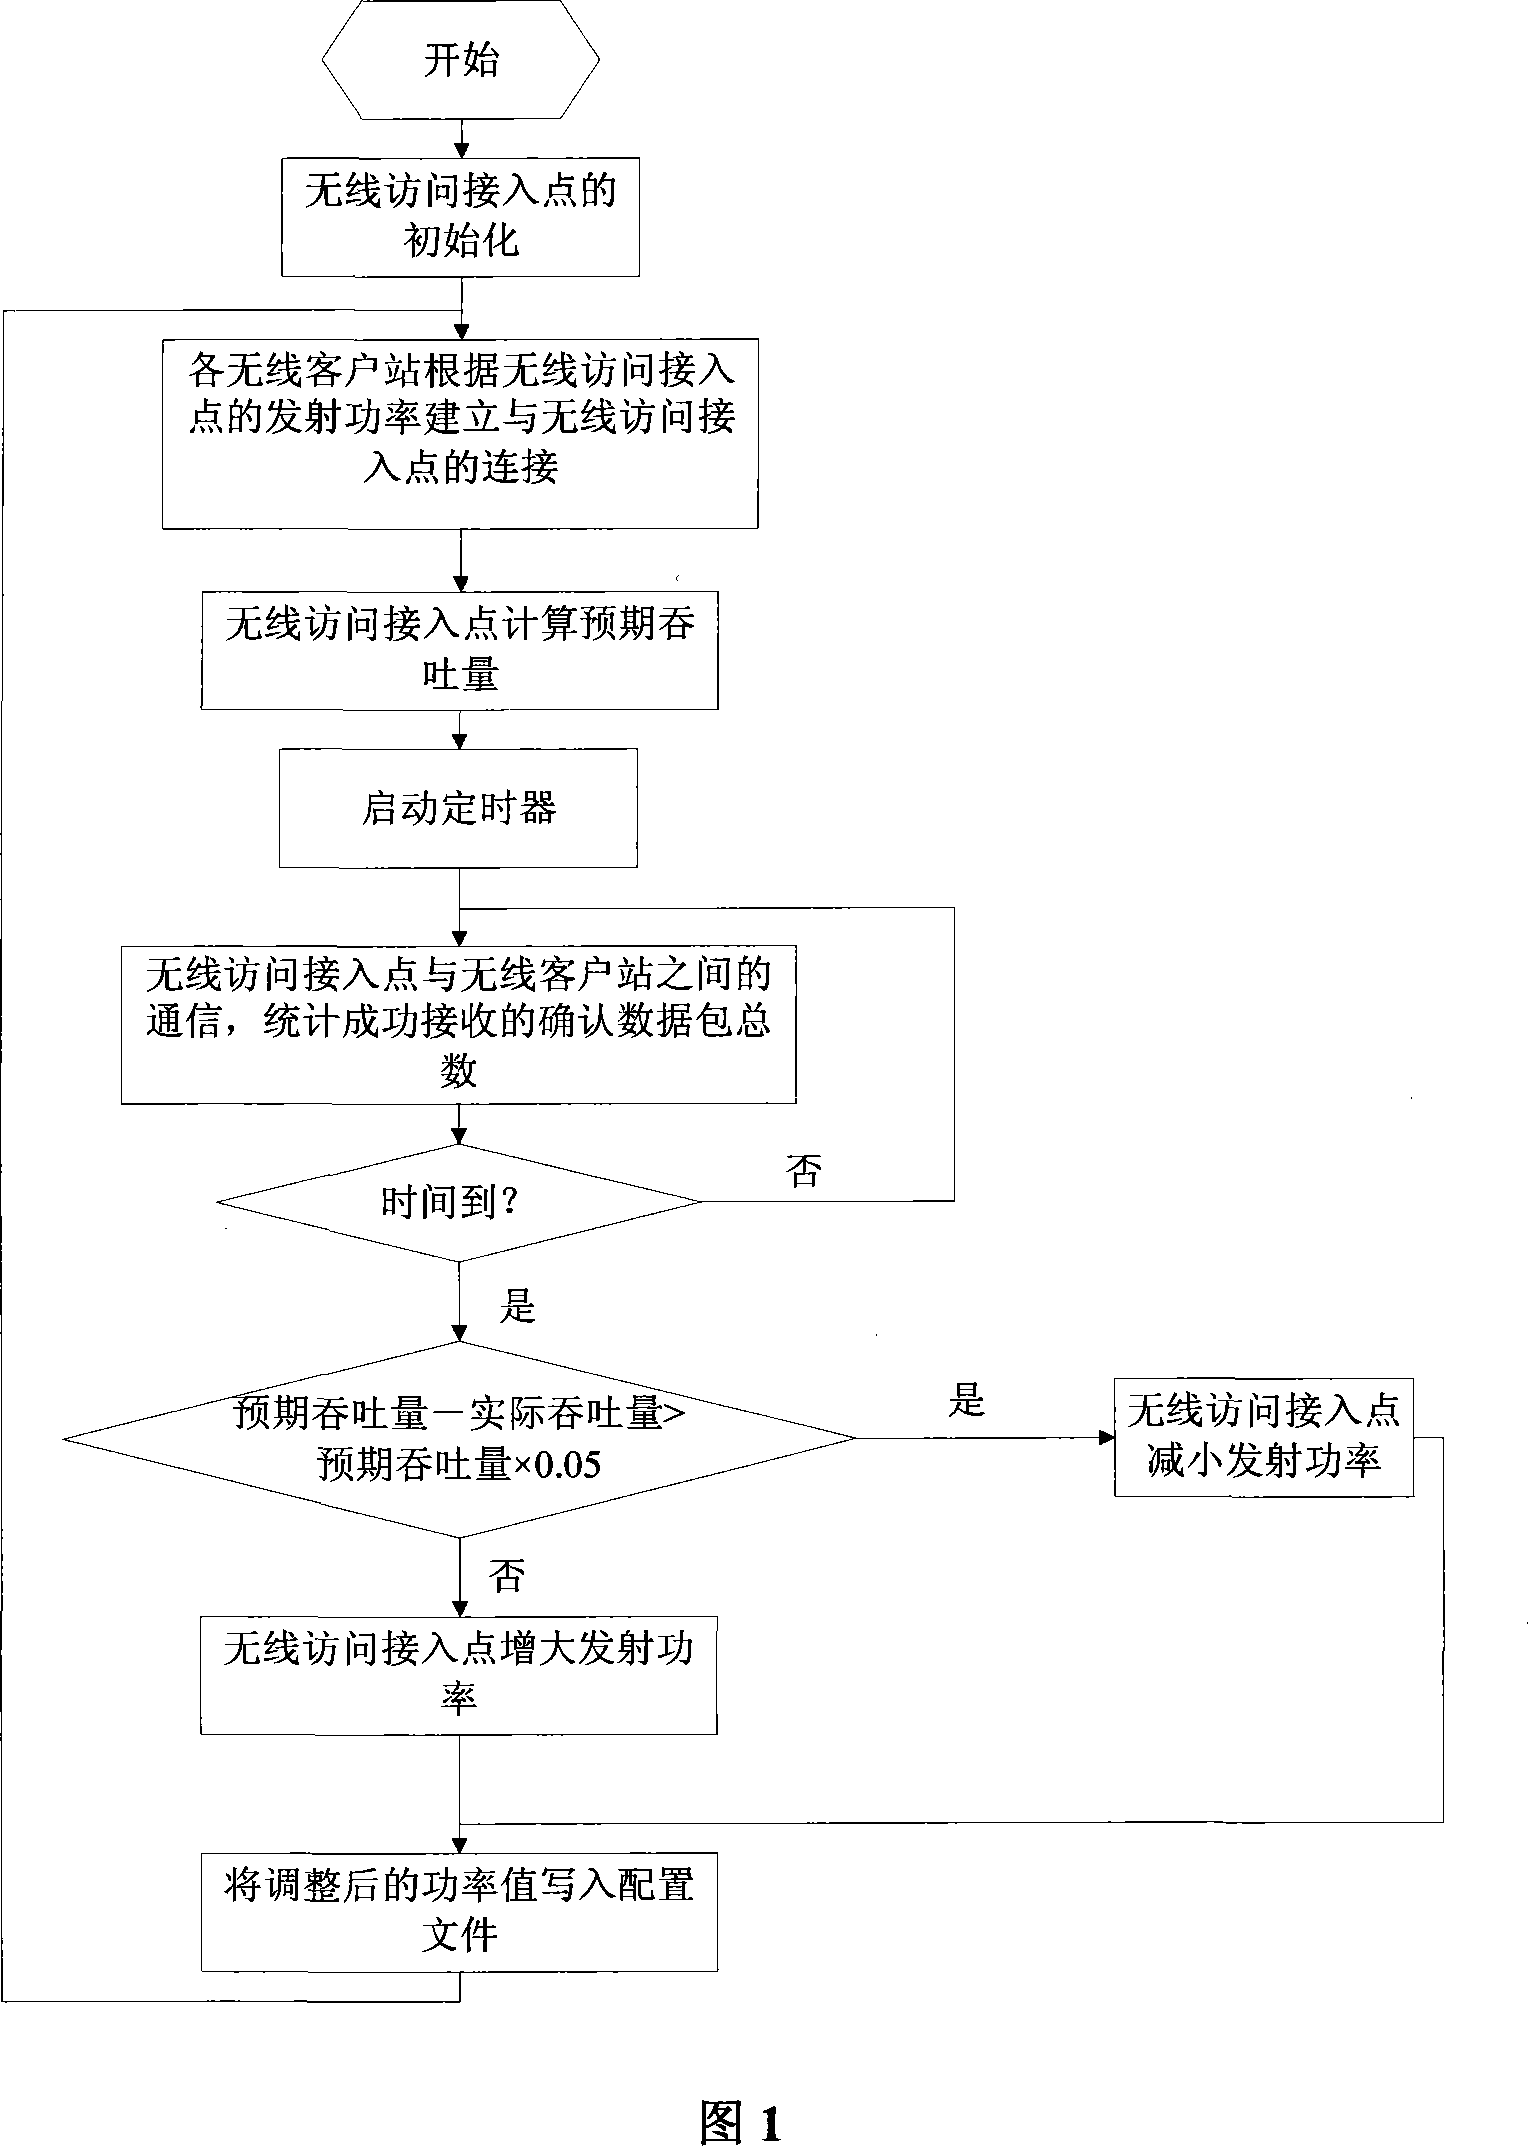 Self-adapted distributed power control method